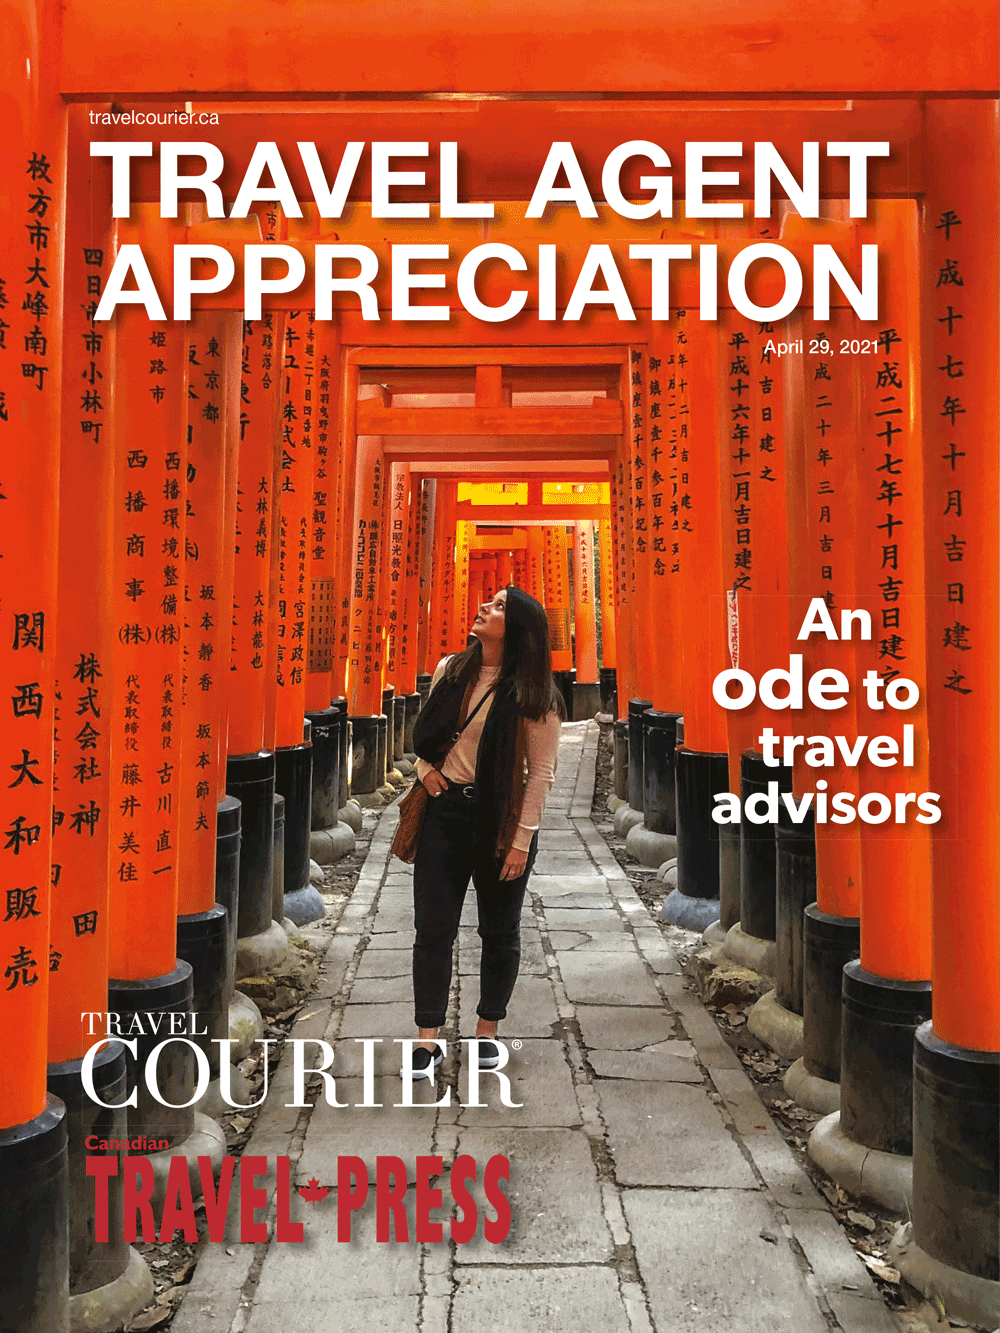 Travel Agent Appreciation is here